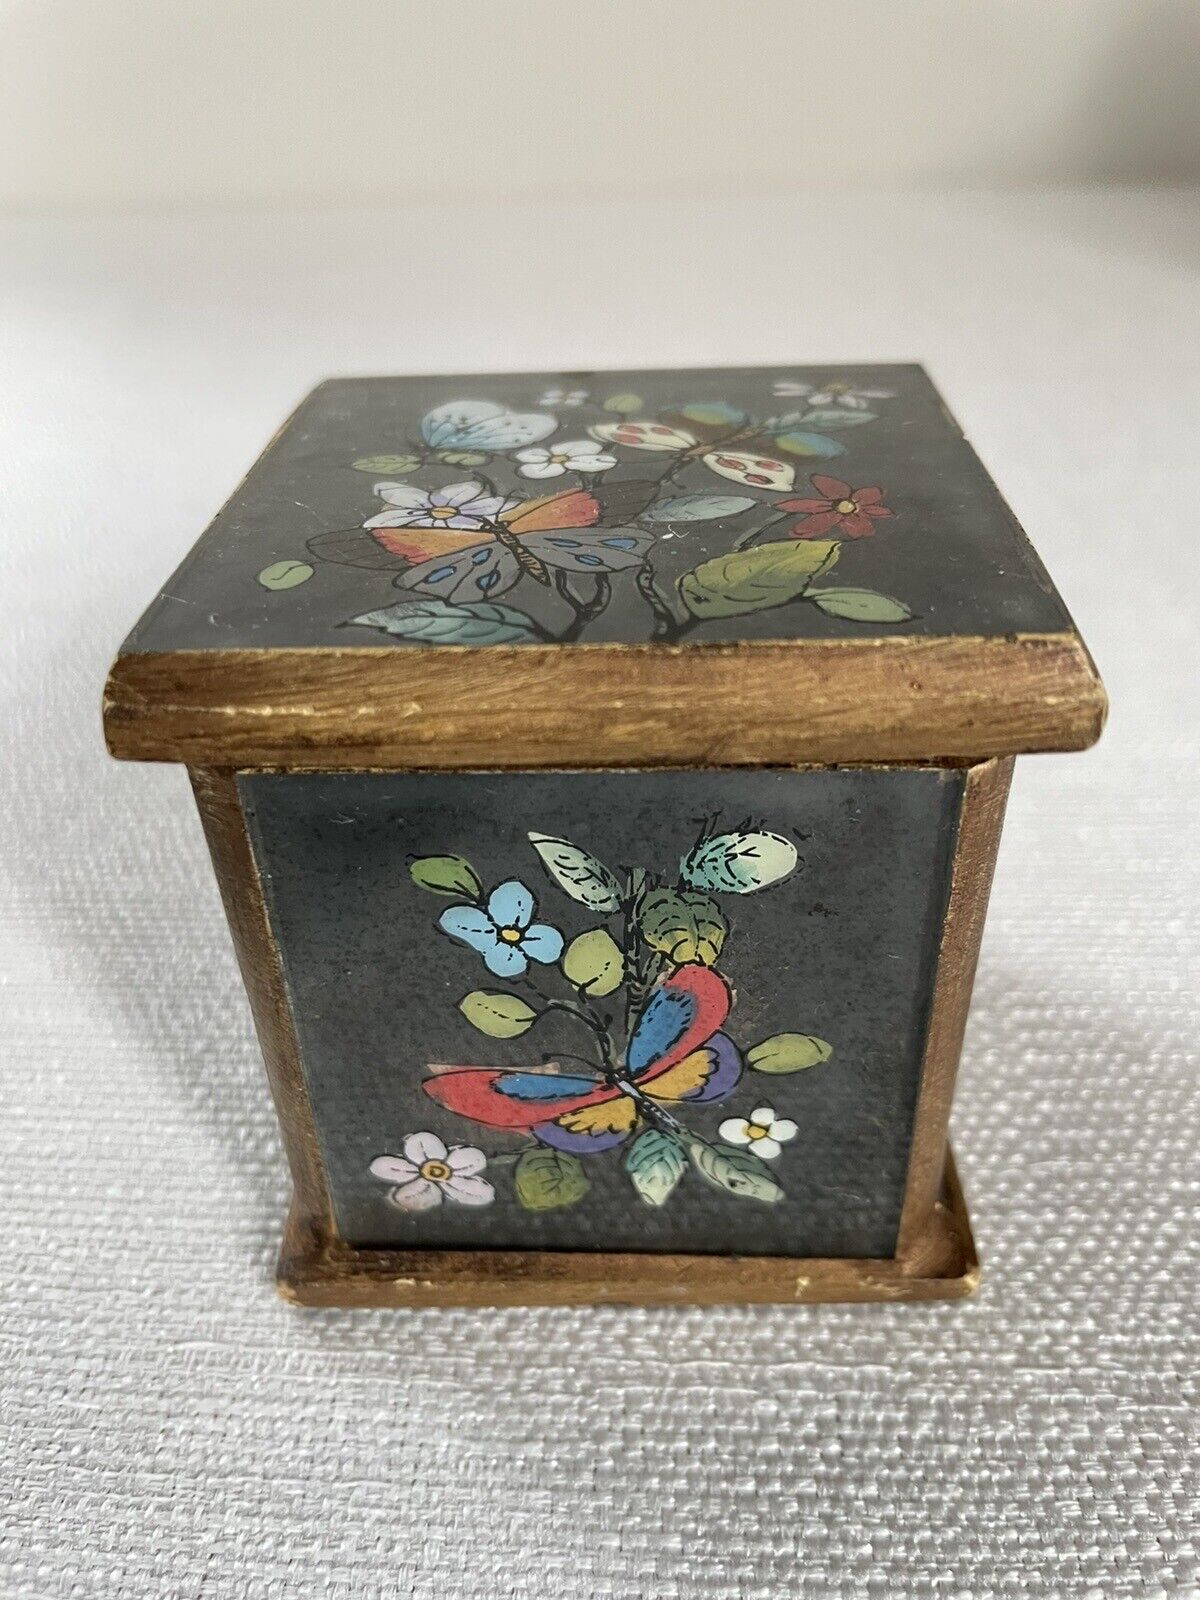 VTG Reverse Painted Decorative Wooden Box W/Flowers/Butterflies Stained Glass